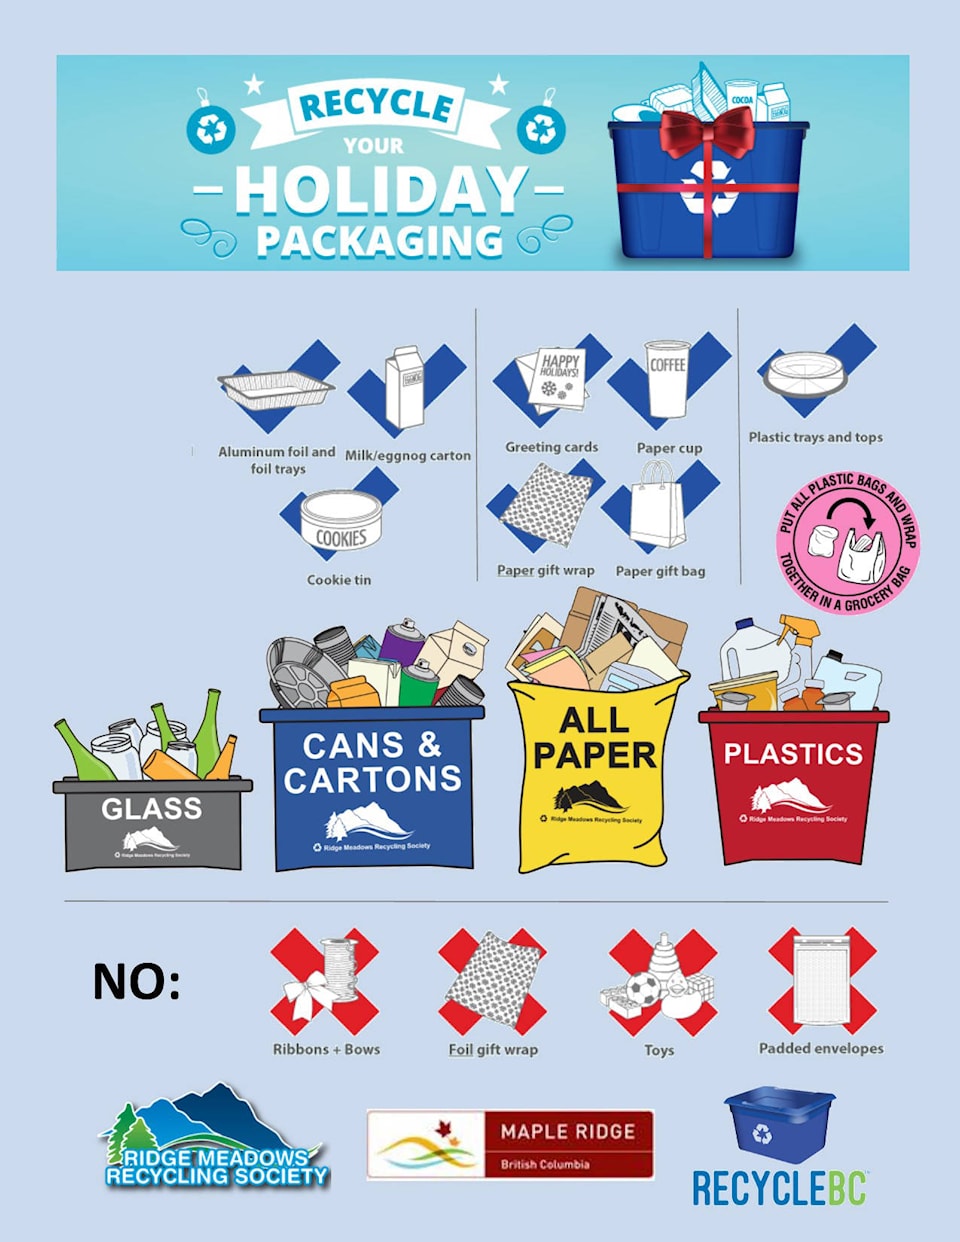 14606662_web1_Holiday-Recycling-Guide-2018